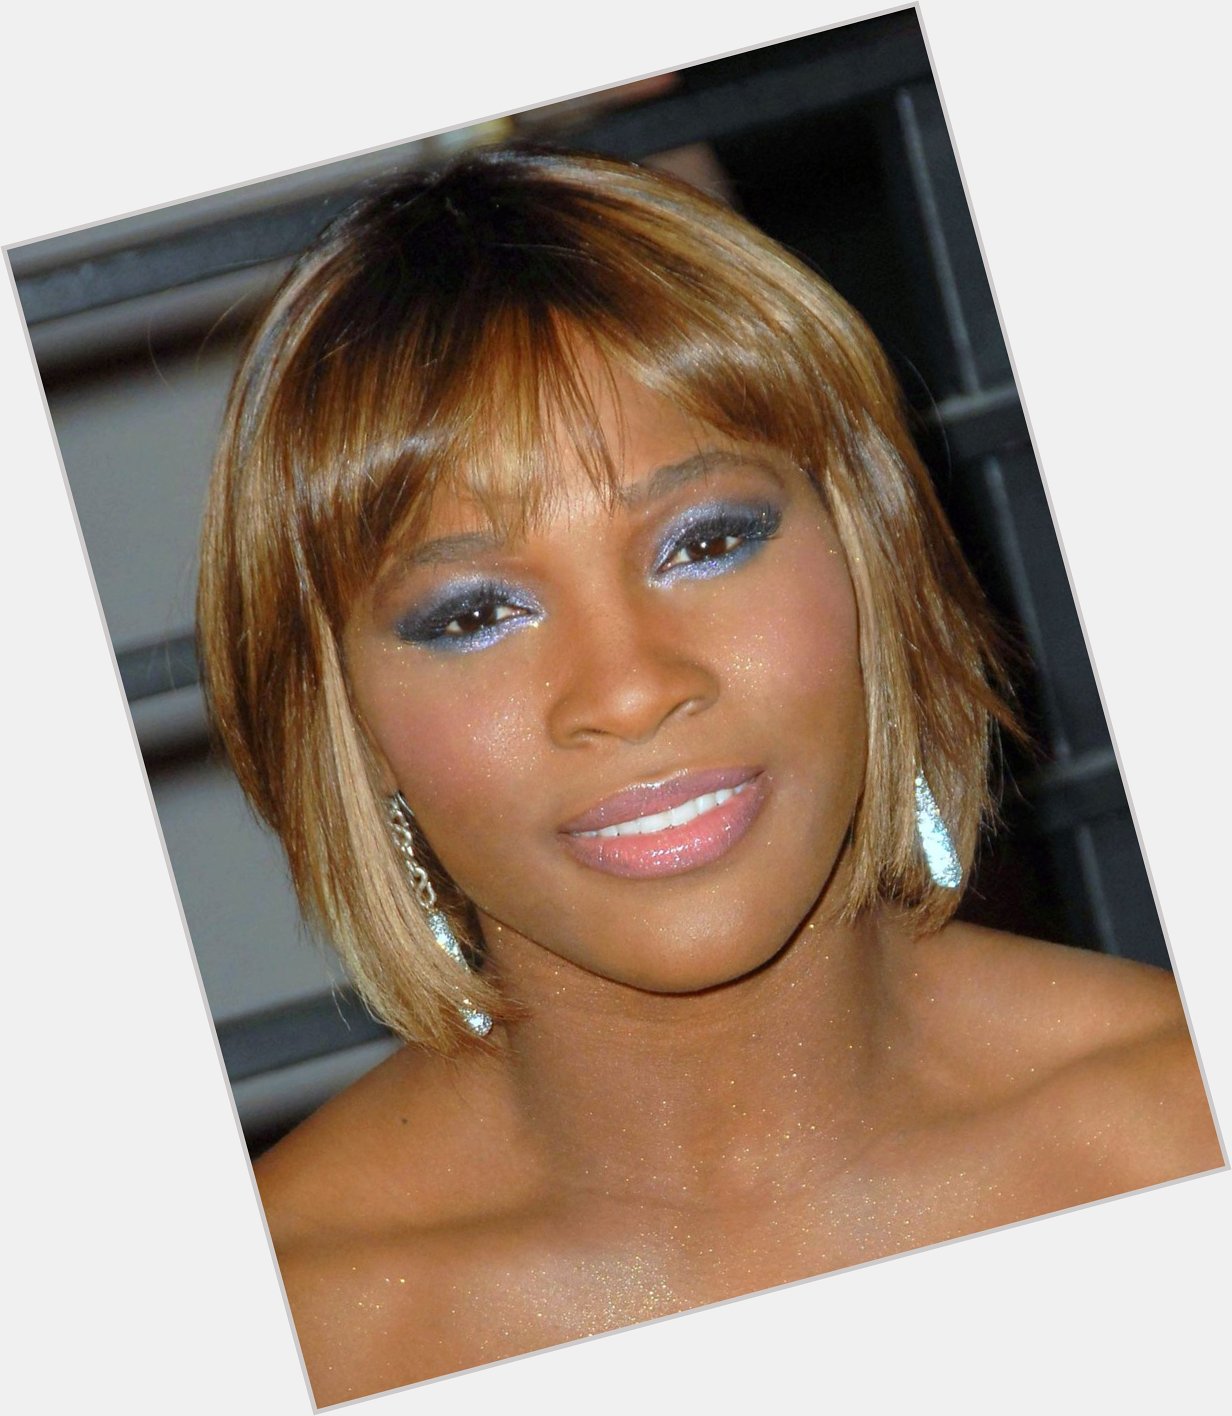 Serena Williams September 26 Sending Very Happy Birthday Wishes! All the Best! 